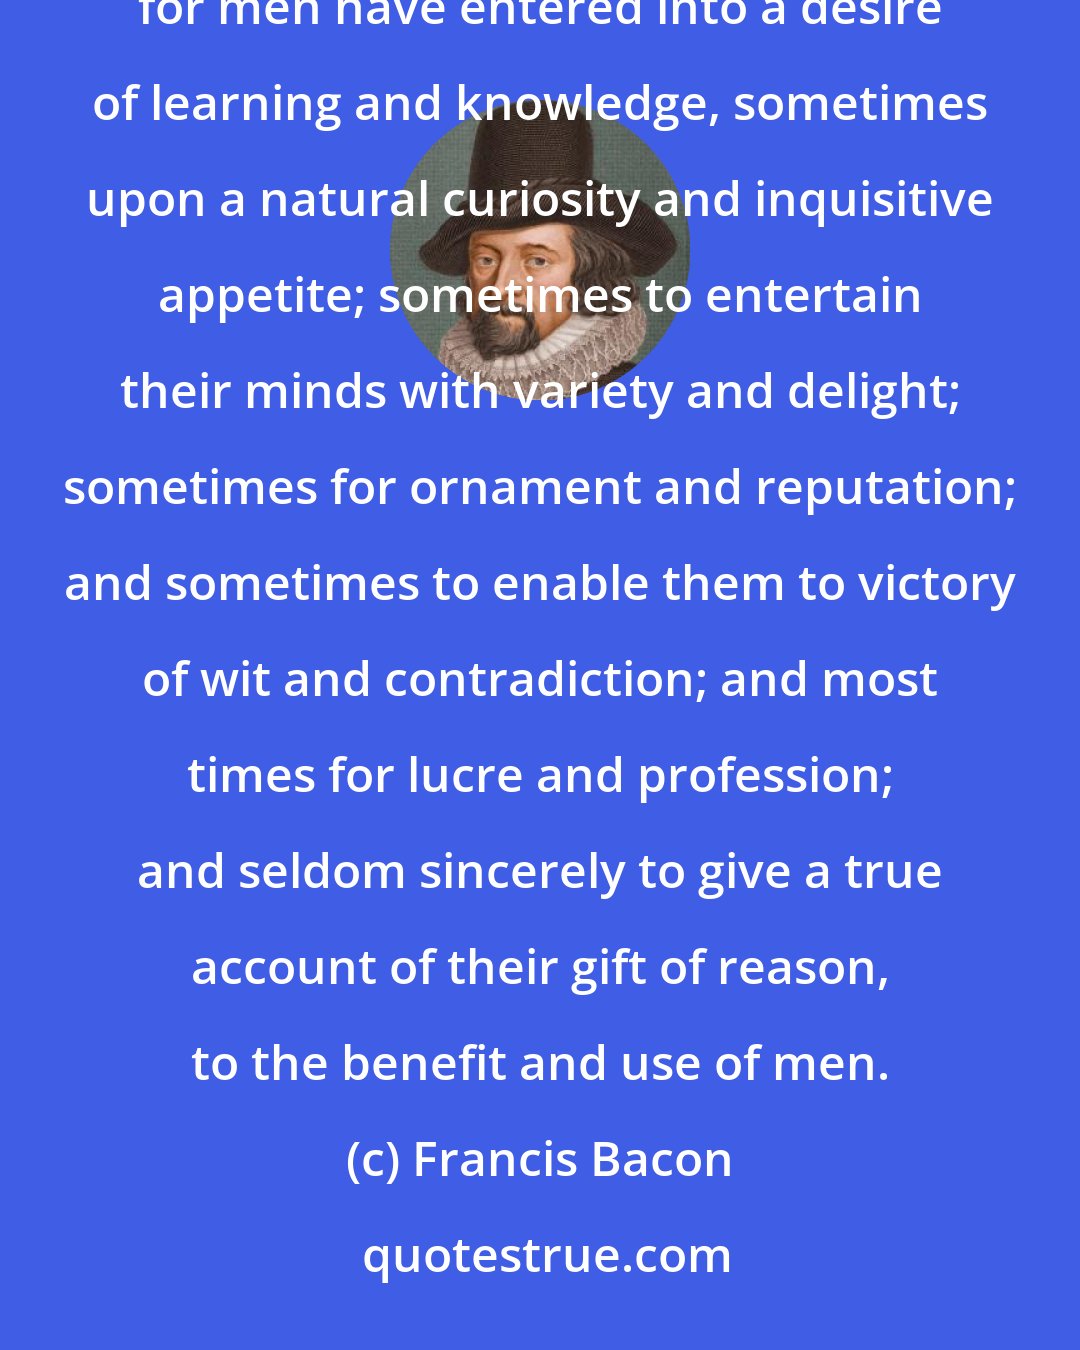 Francis Bacon: But the greatest error of all the rest is the mistaking or misplacing of the last or farthest end of knowledge: for men have entered into a desire of learning and knowledge, sometimes upon a natural curiosity and inquisitive appetite; sometimes to entertain their minds with variety and delight; sometimes for ornament and reputation; and sometimes to enable them to victory of wit and contradiction; and most times for lucre and profession; and seldom sincerely to give a true account of their gift of reason, to the benefit and use of men.